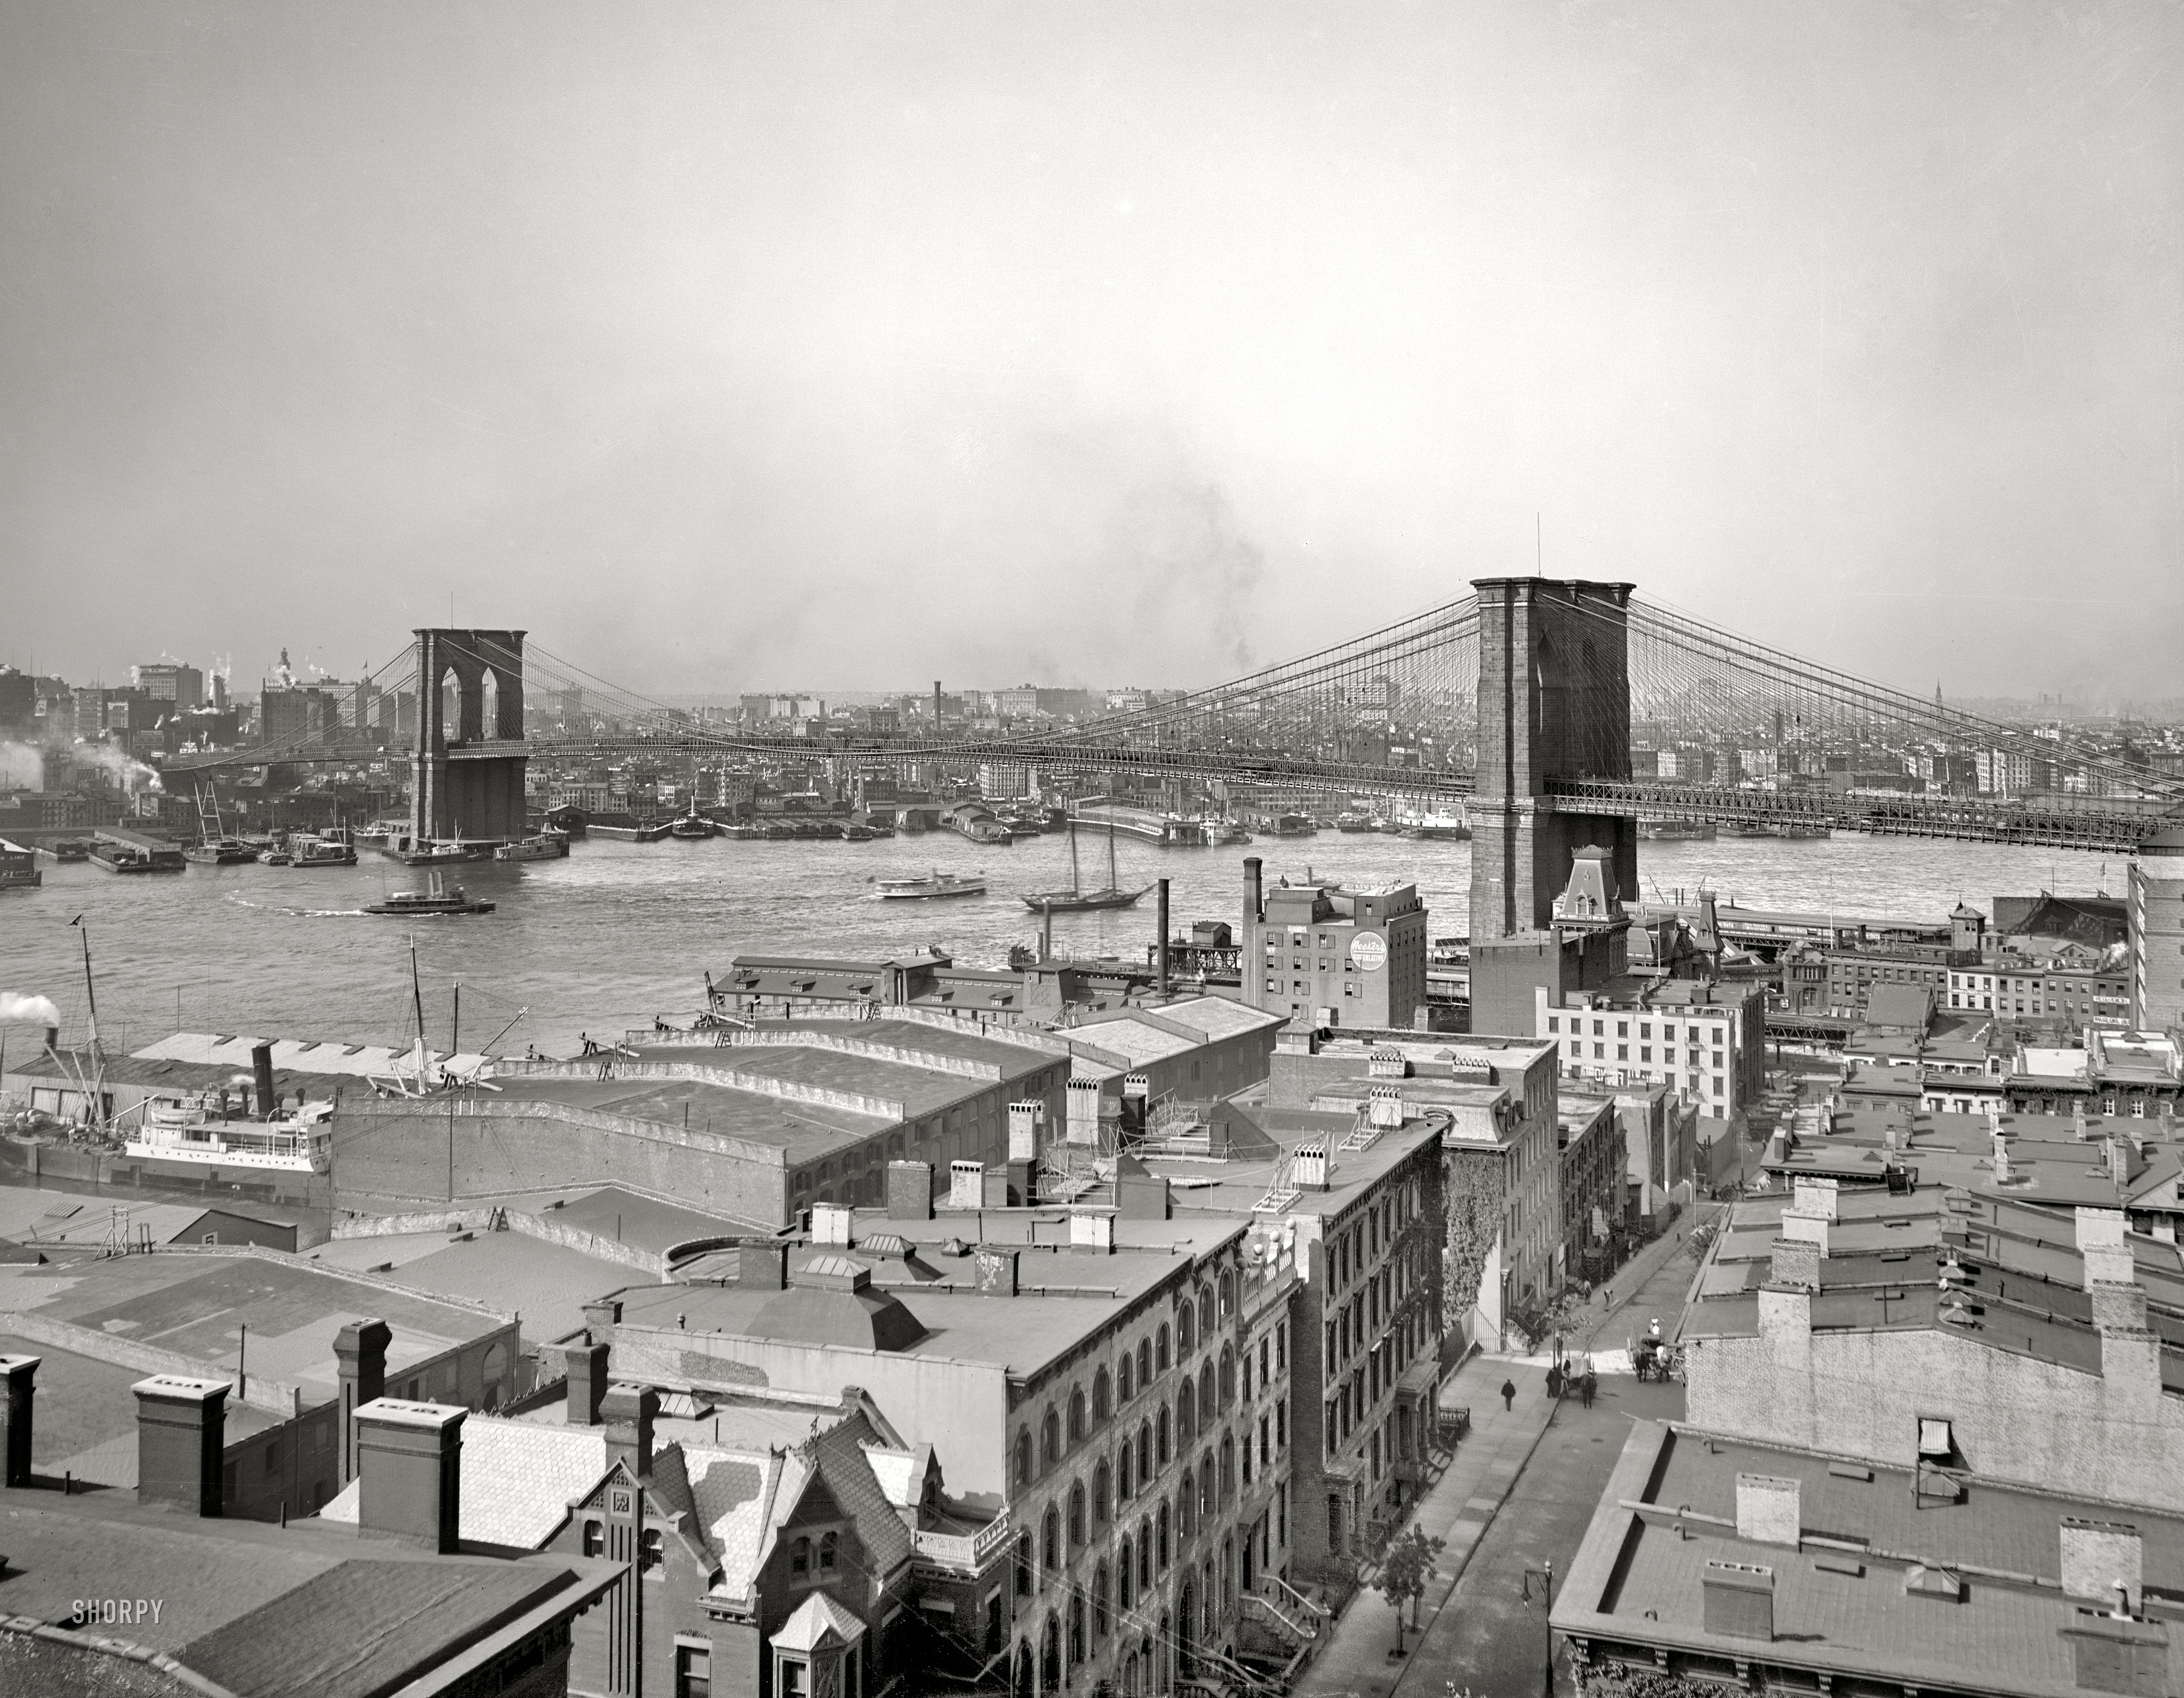 Circa 1904. "Manhattan, East River and Brooklyn Bridge from Brooklyn." Another grayscale view of an evergreen subject. 8x10 glass negative. View full size.